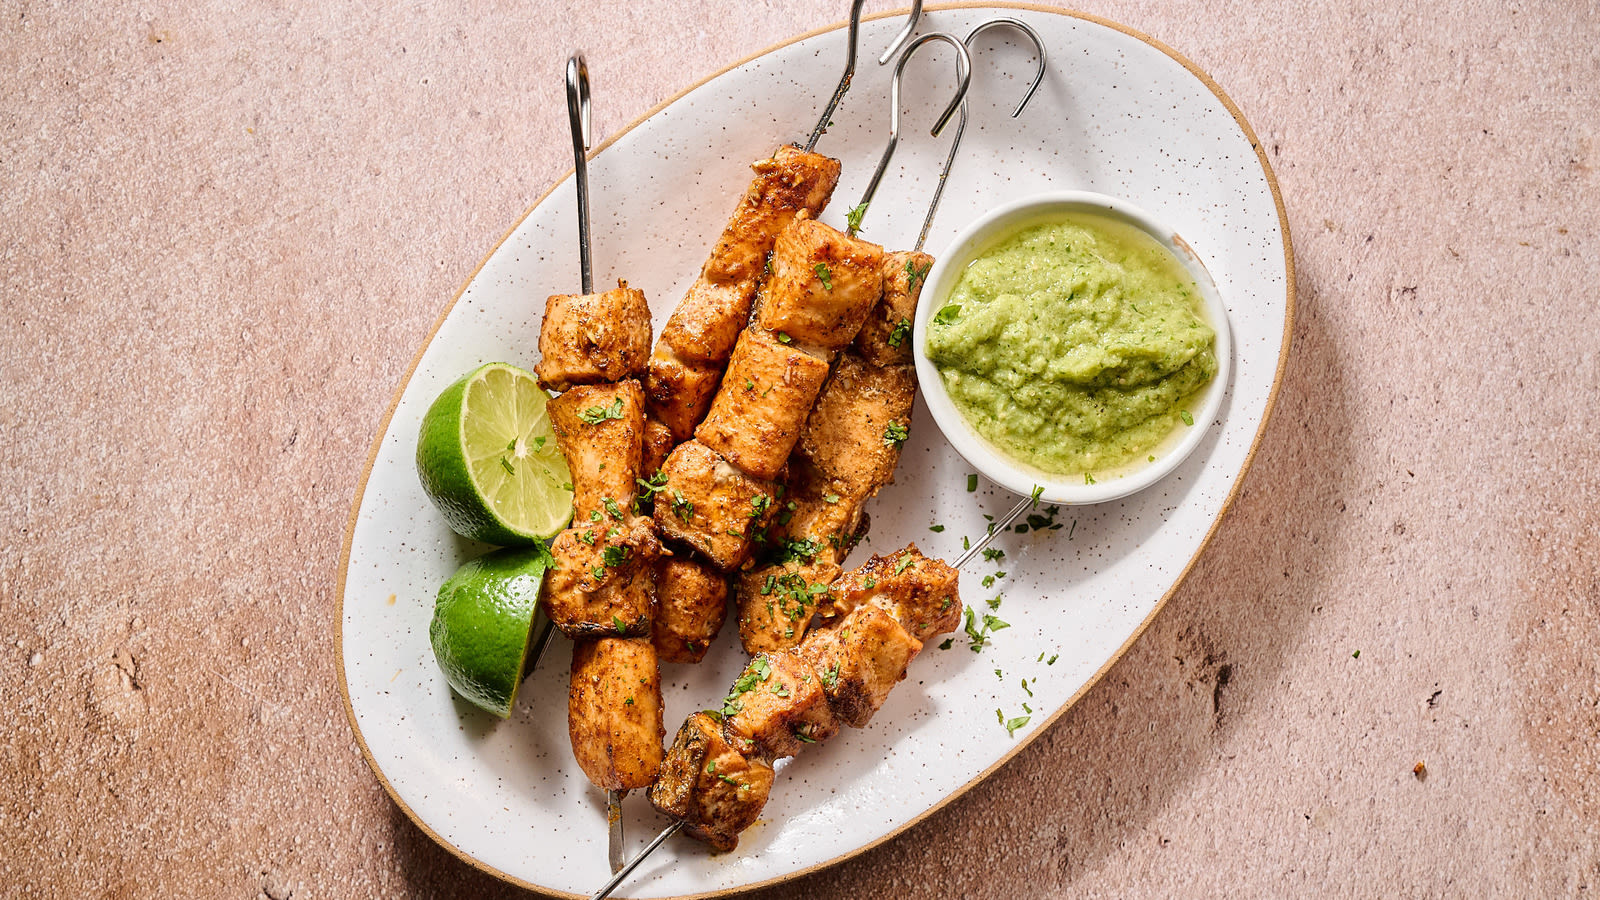 Chile-Rubbed Salmon Skewers With Salsa Verde Recipe